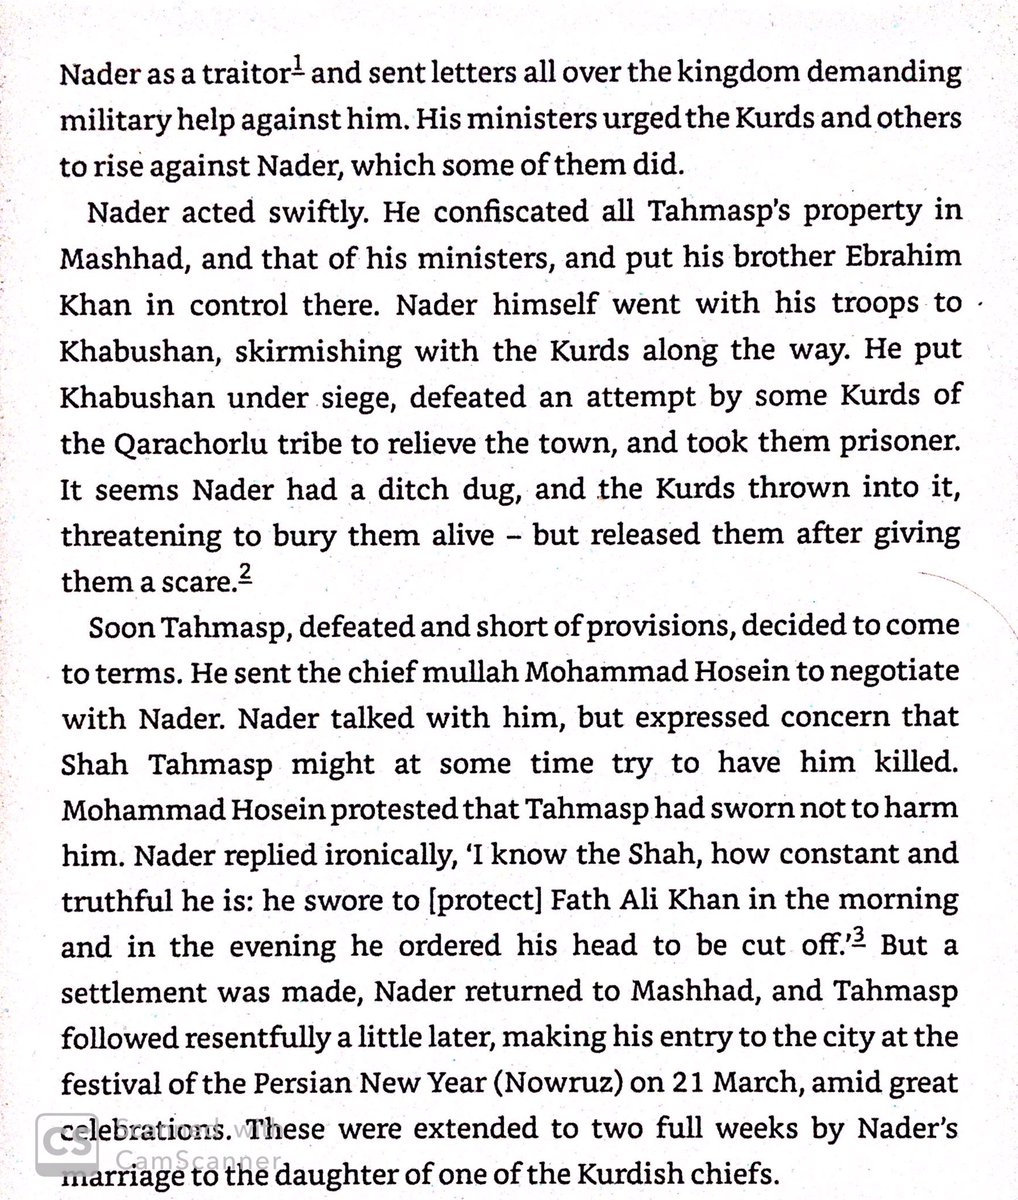 Disputes on war strategy in 1728 led to Shah Tahmasp trying to eliminate Nader. Nader prevailed, & kept Tahmasp as a puppet thereafter.